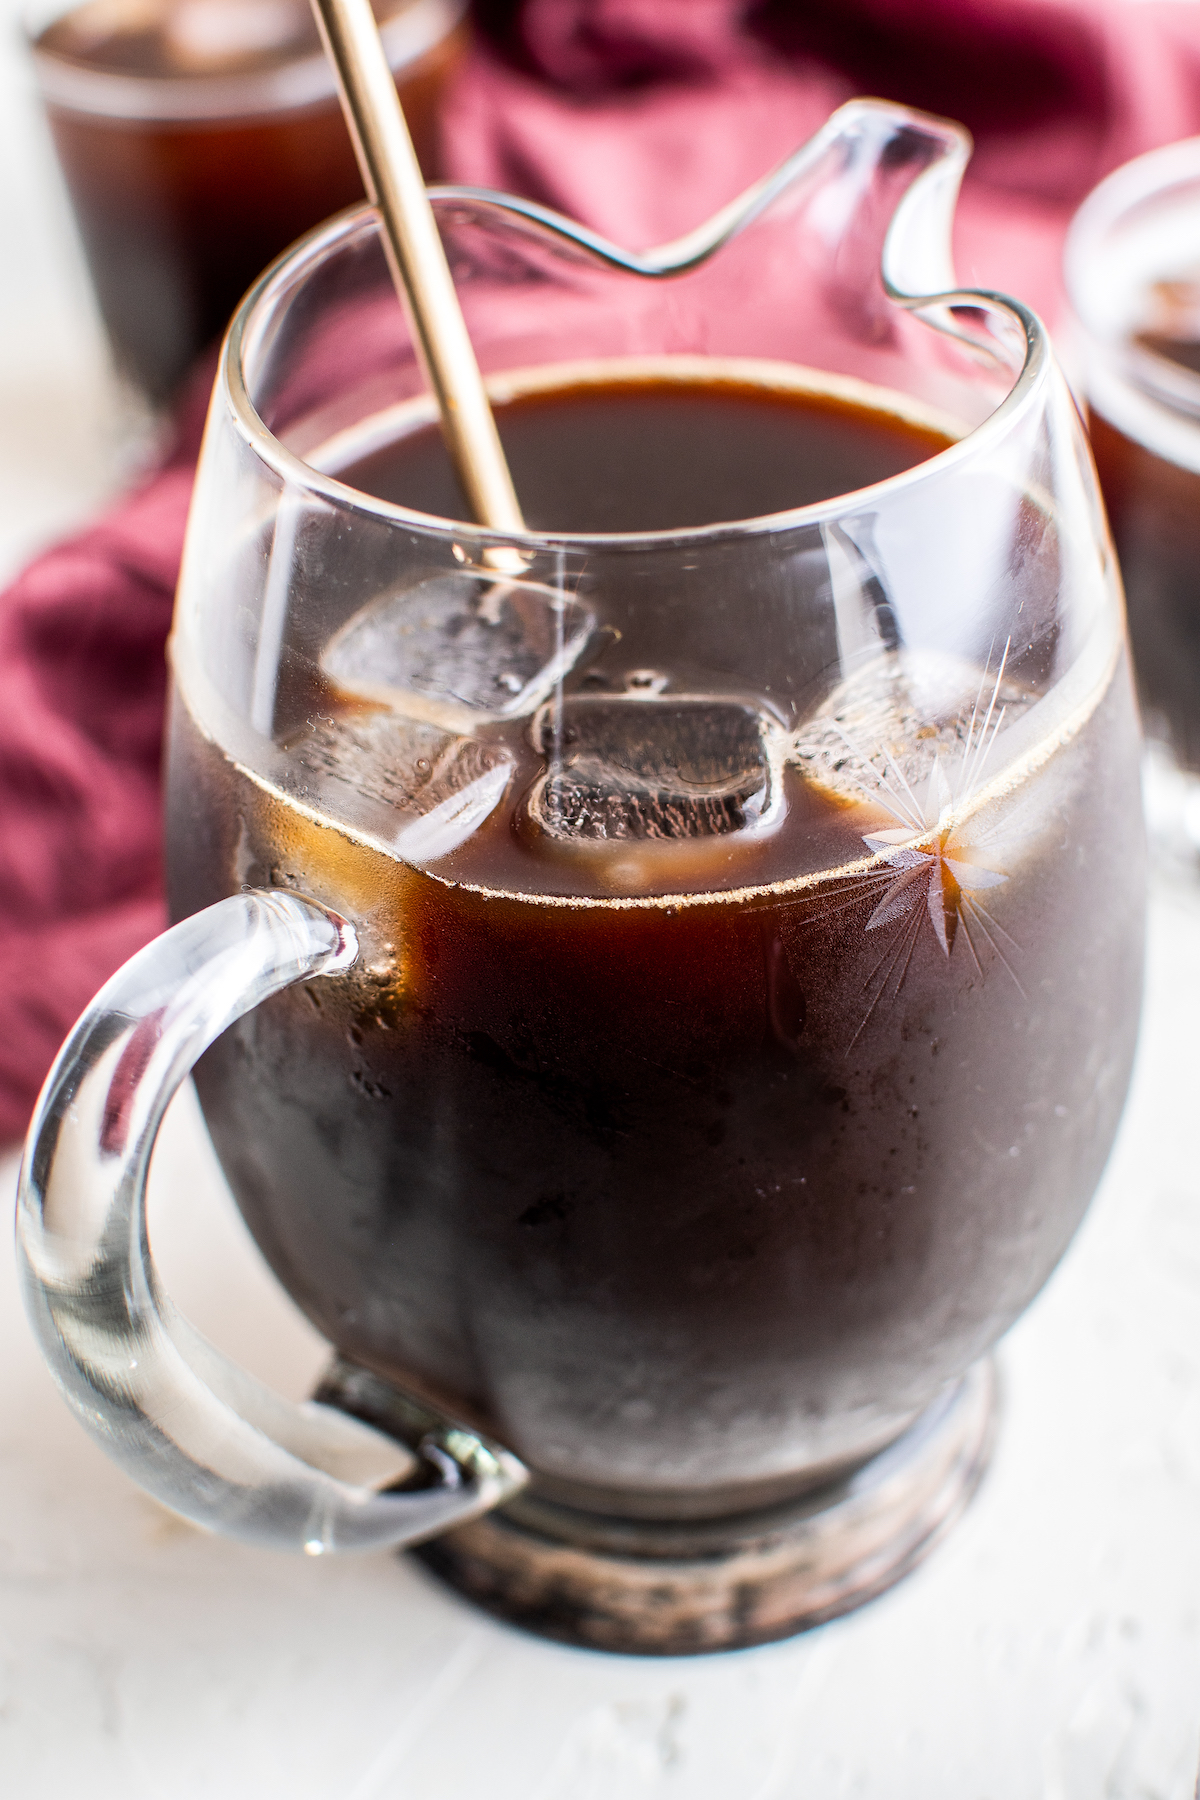 A clear glass cocktail pitcher filled with coffee, liqueur, and ice with a golden stirrer.